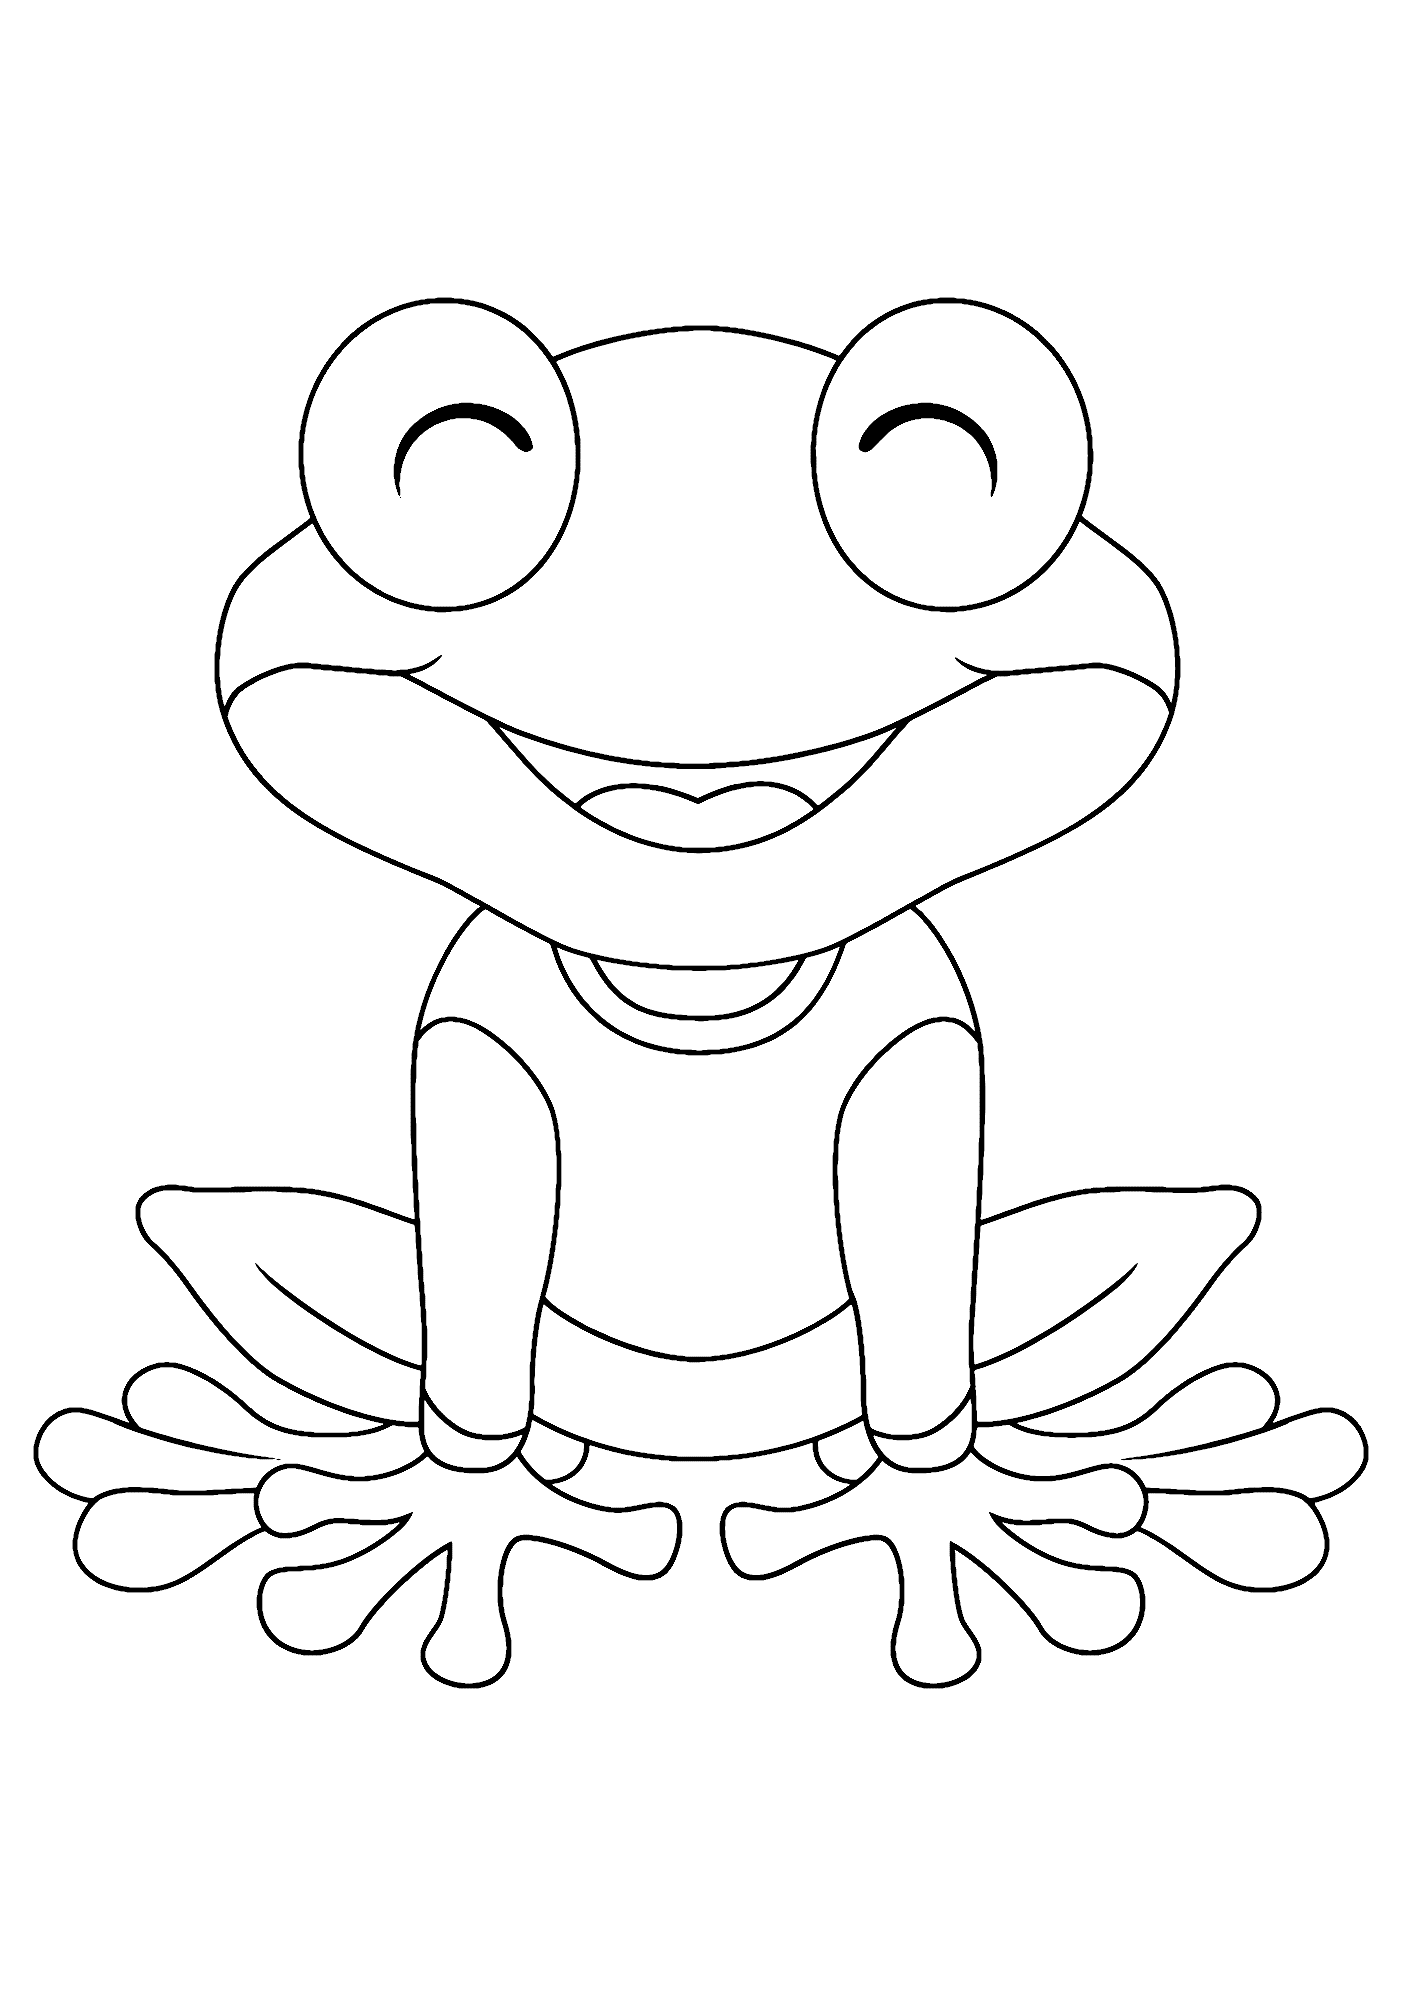 Toad For Children Image Coloring Pages